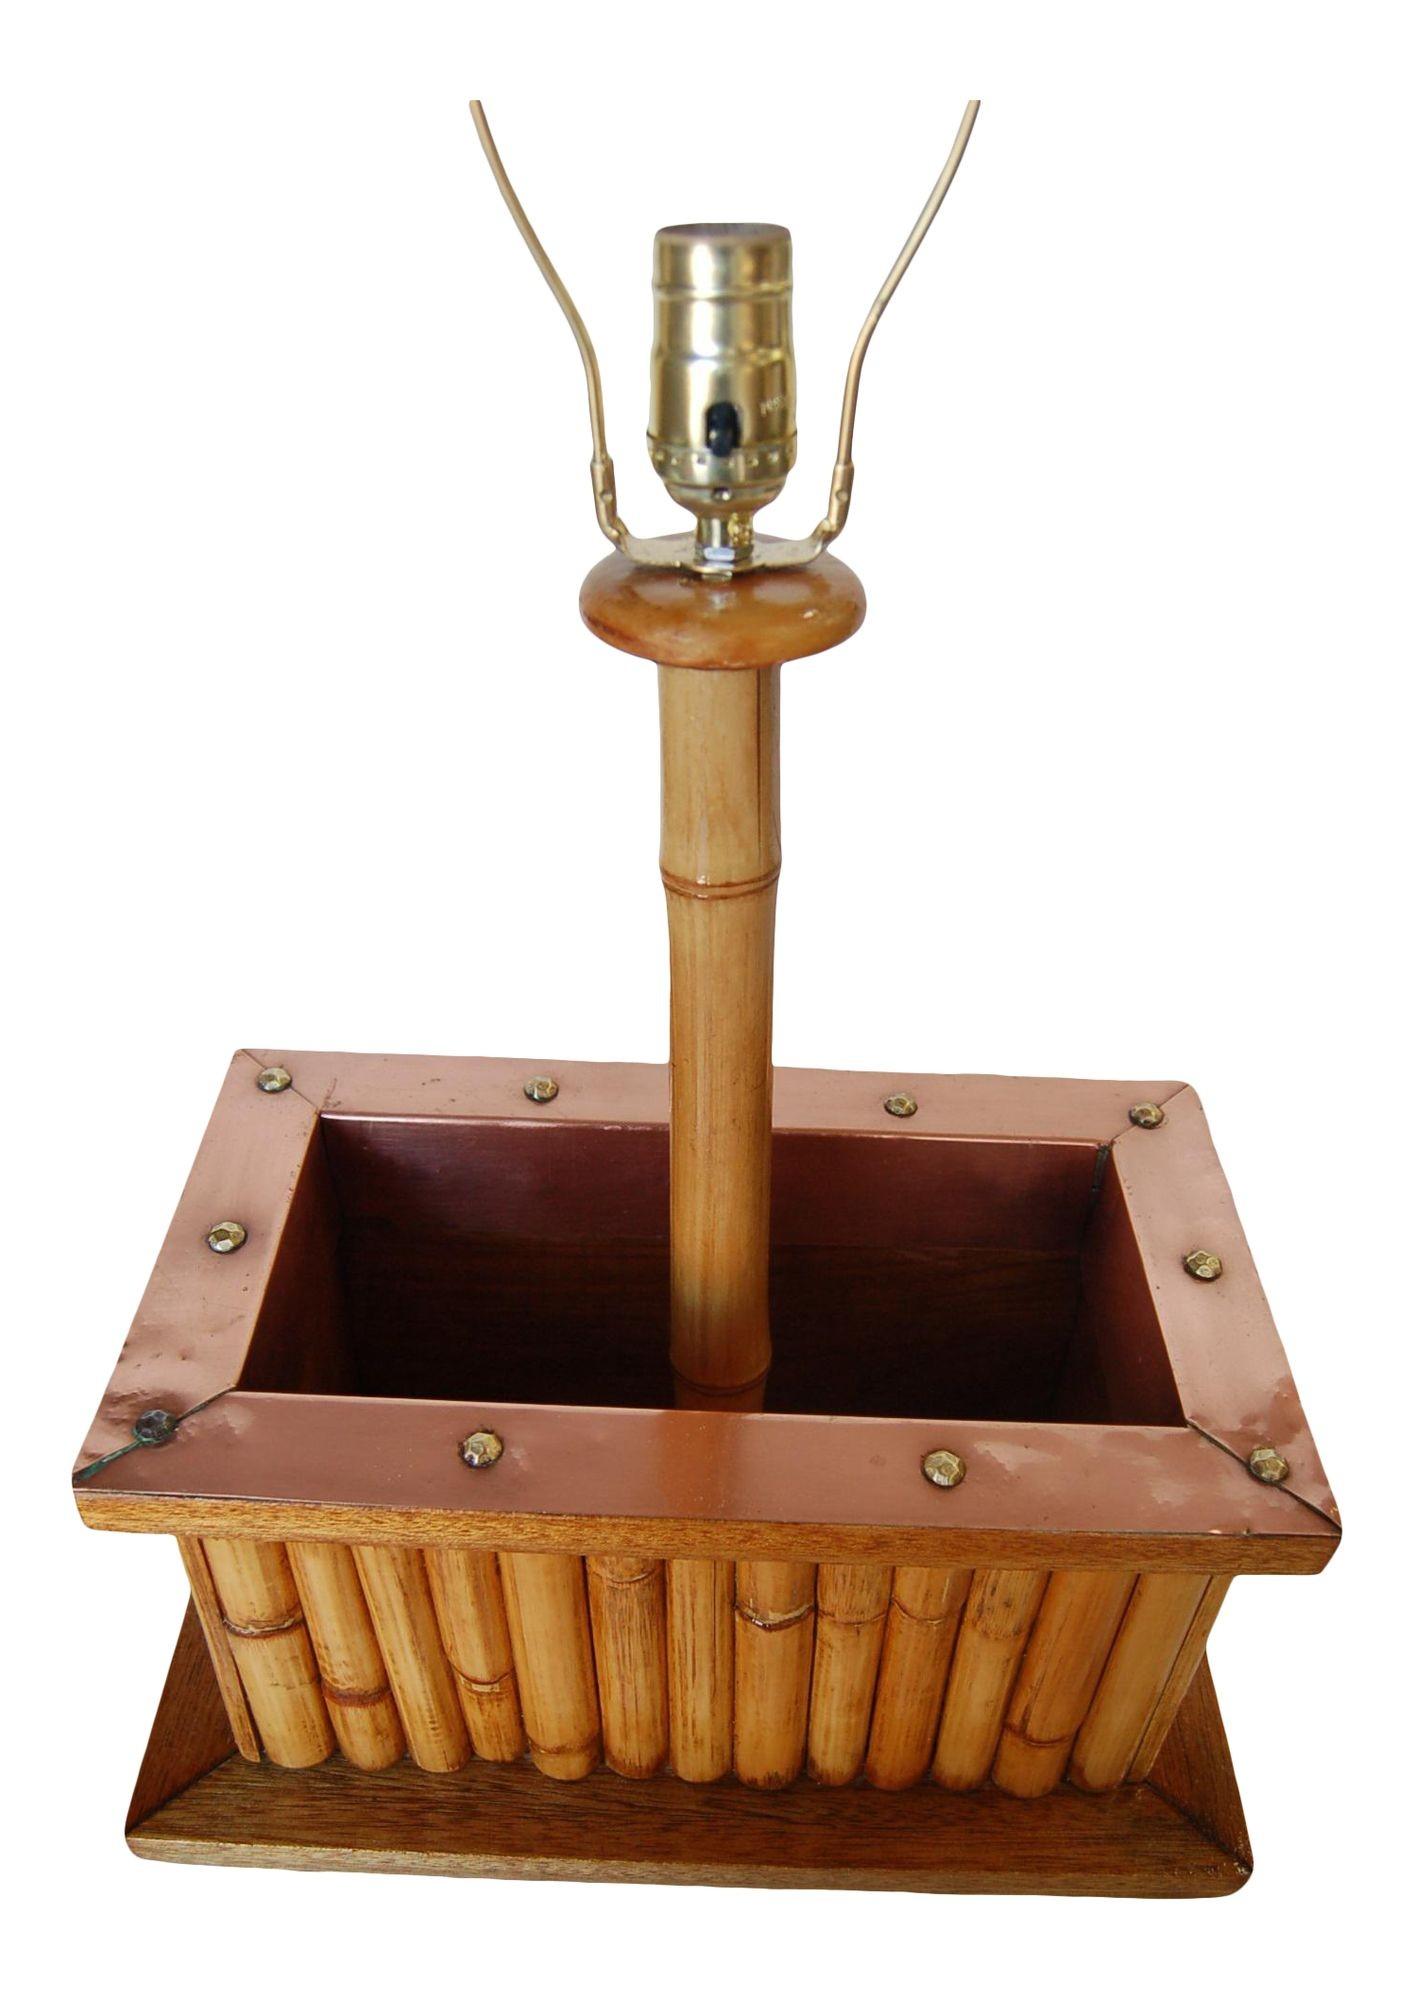 Restored Mid-Century rattan table lamp featuring a copper planter in the center, circa 1950.

Measures 20